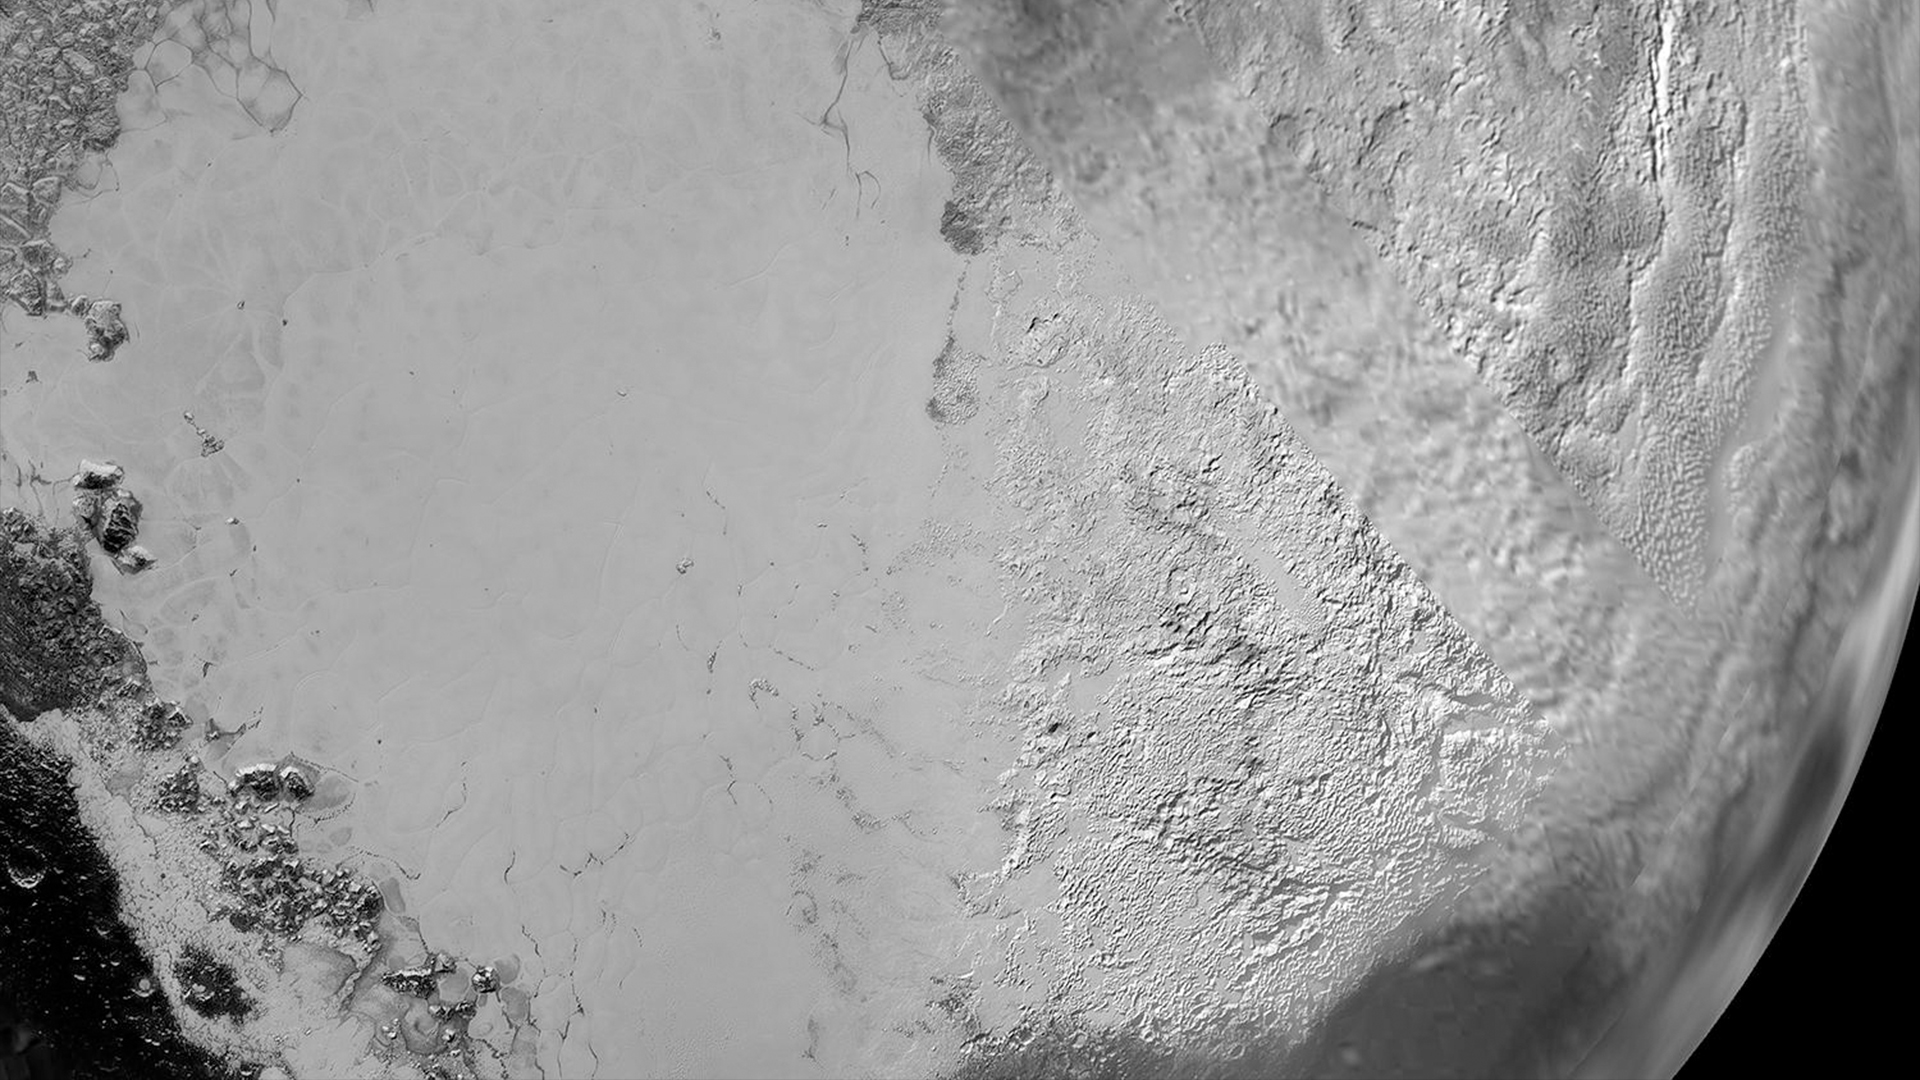 Sputnik Planum is the informal name of the smooth, light-bulb shaped region on the left of this composite of several of NASA New Horizons images of Pluto.